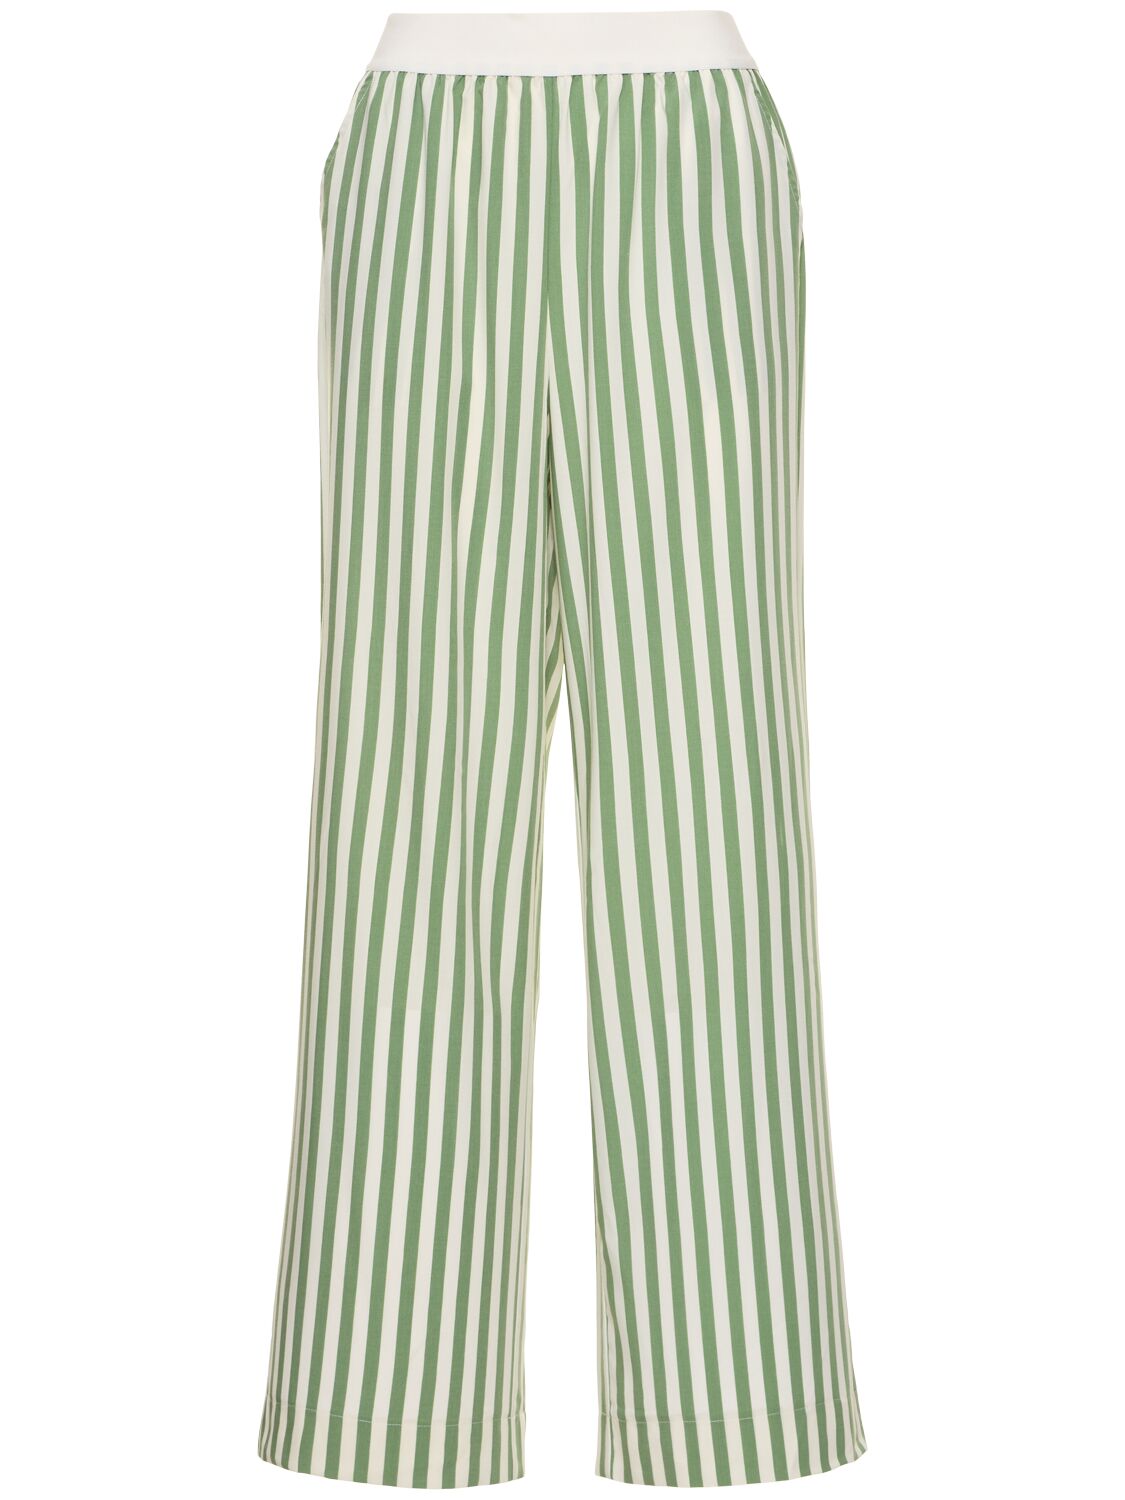 Image of Stretch Jersey Wide Leg Pants